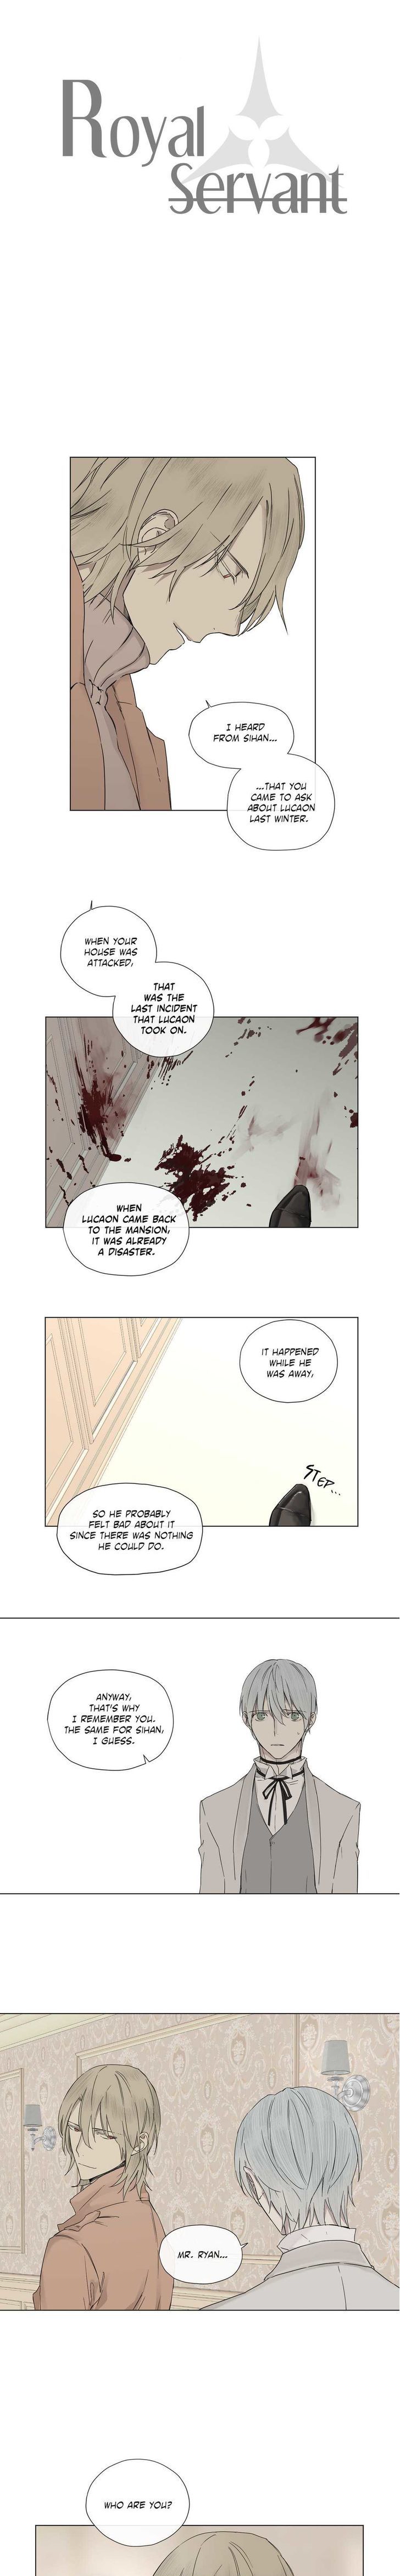 Royal Servant - Chapter 13 Page 5